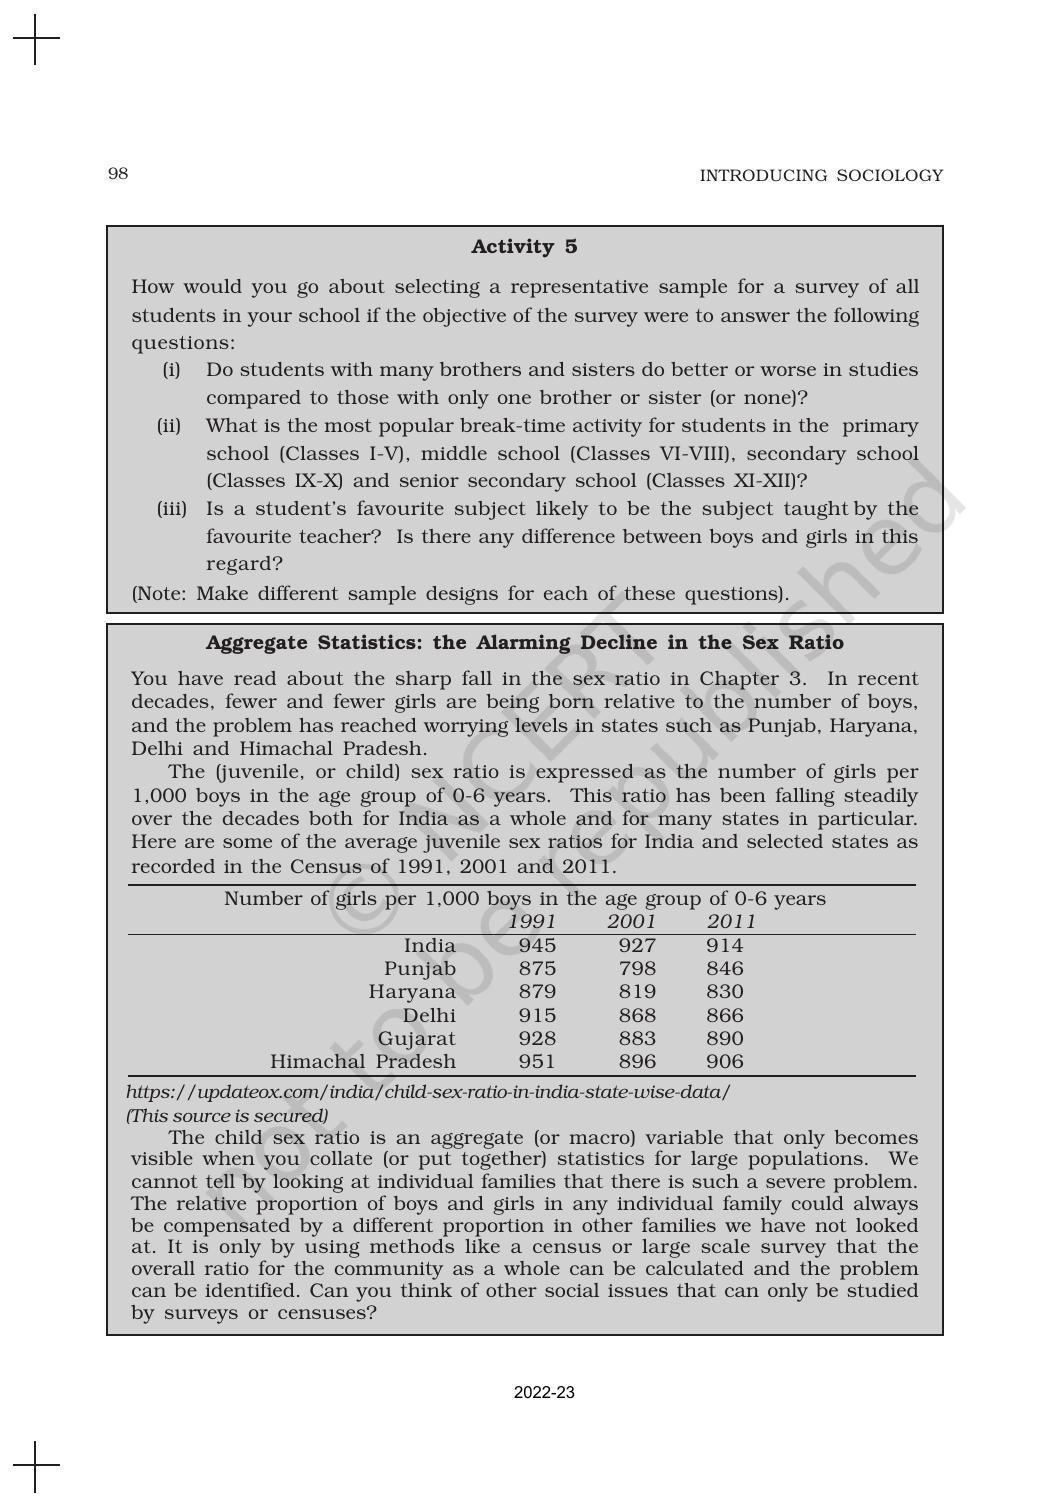 NCERT Book for Class 11 Sociology (Part-I) Chapter 5 Doing Sociology: Research Methods - Page 17